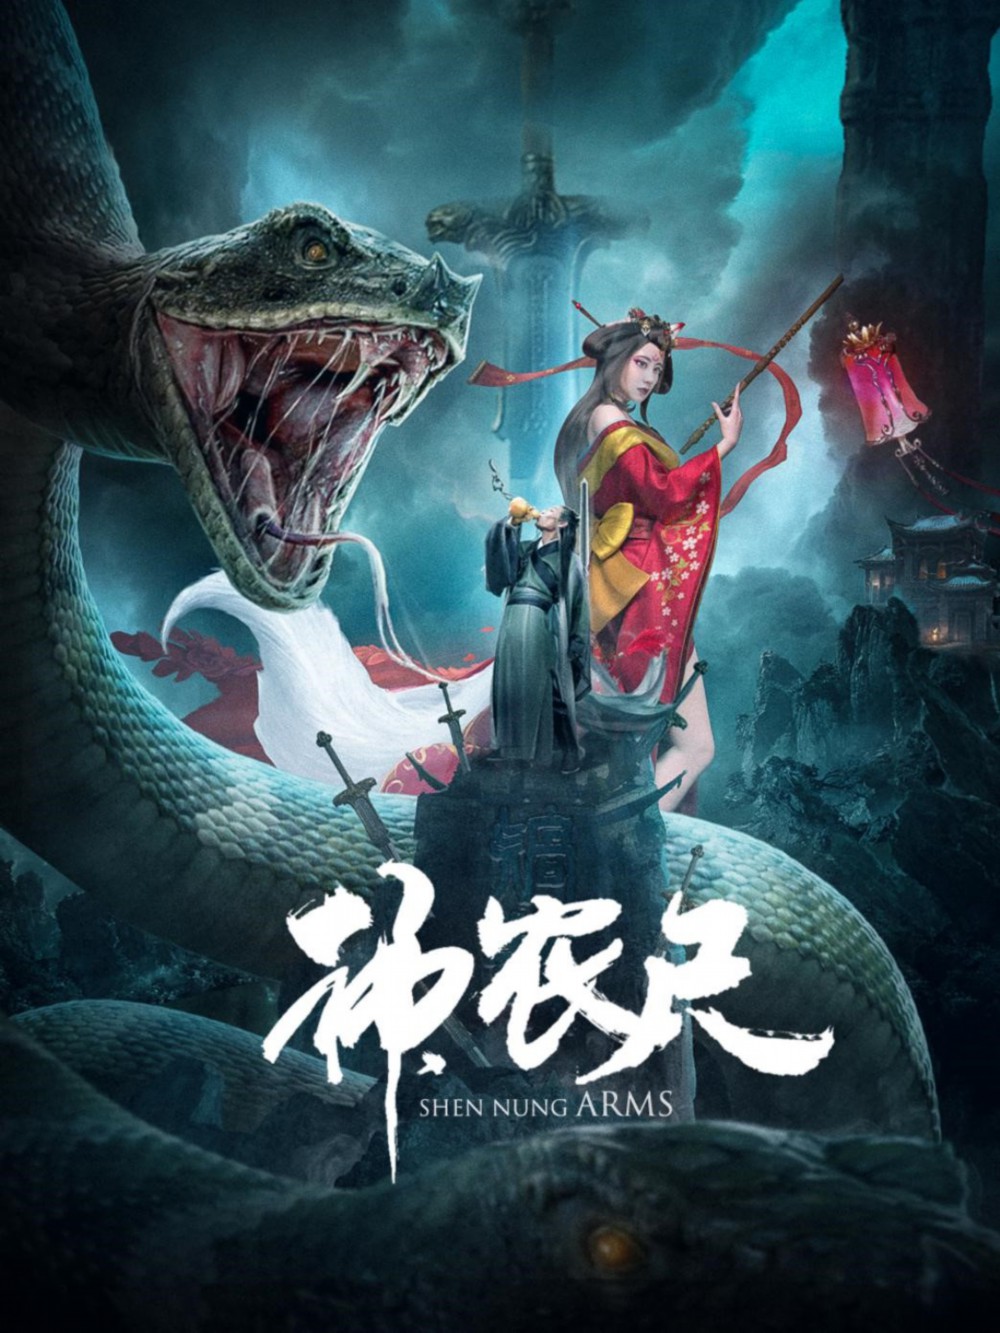 Sword of Shennong (2020) Hindi Dubbed (VoiceOver) 720p HDRip 750MB Download